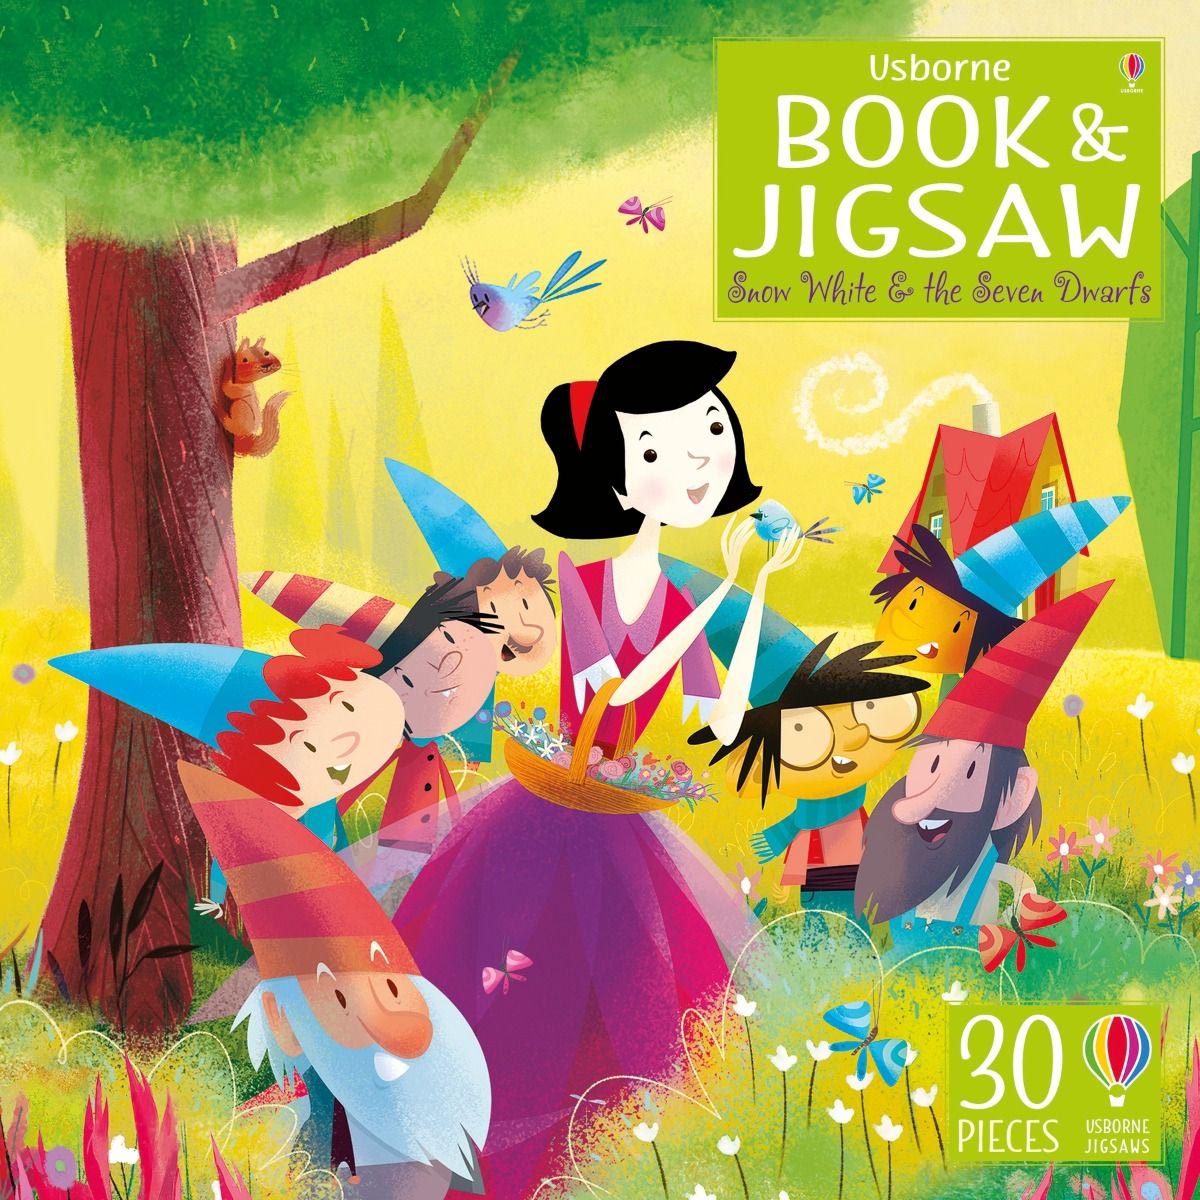 Usborne Book and Jigsaw Snow White and the Seven Dwarfs